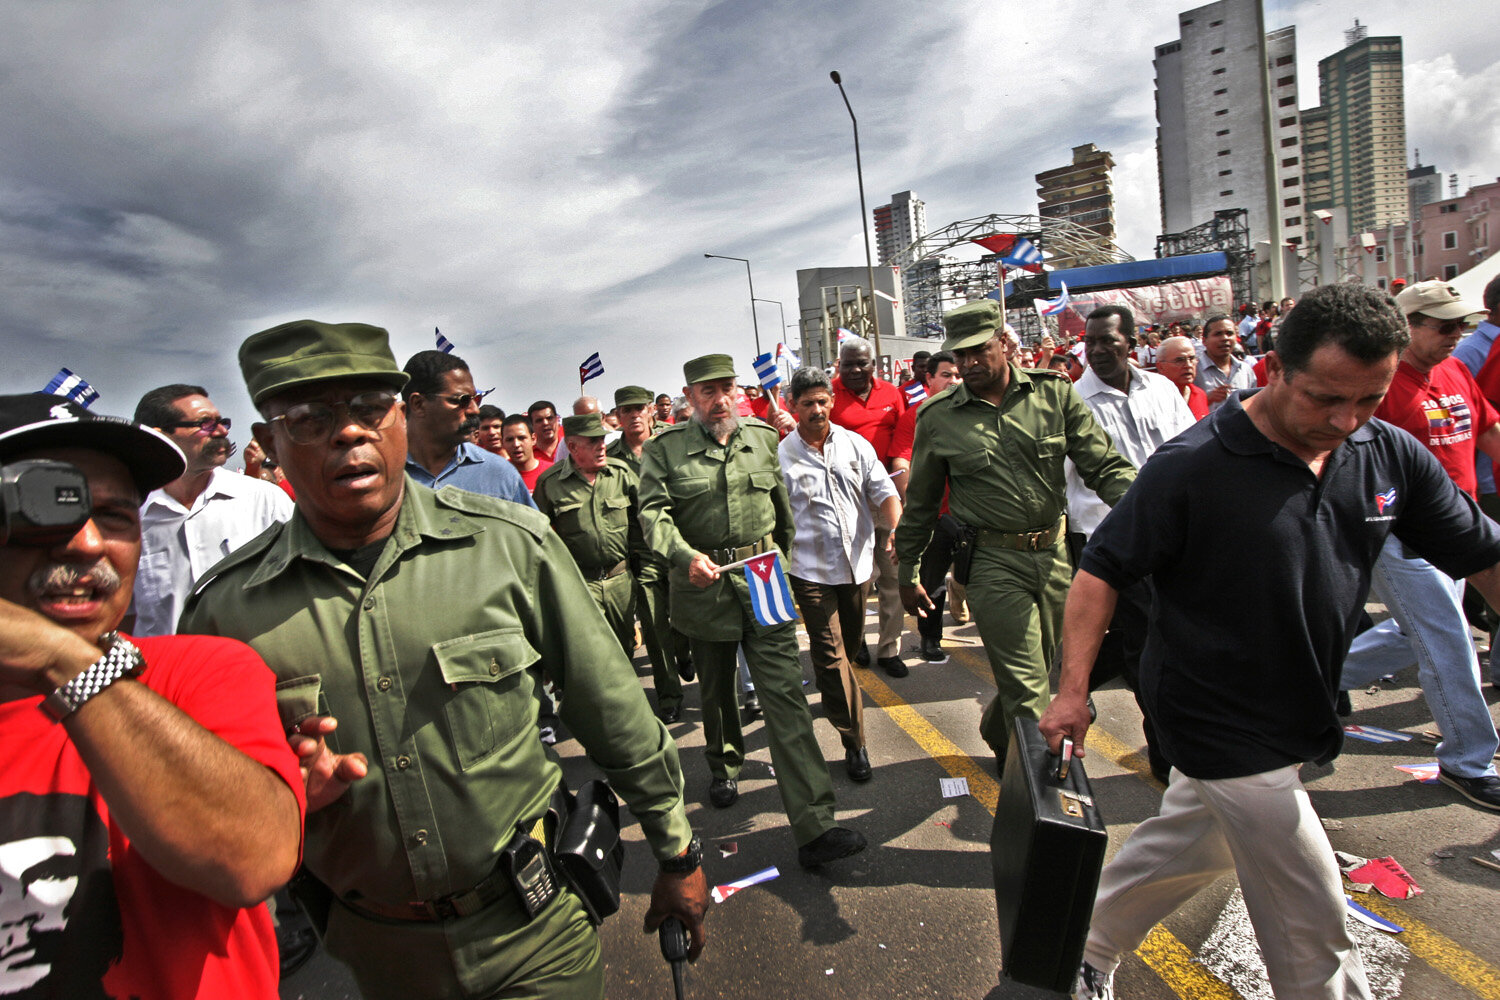  Fidel Castro walks one and a half kilometer closing a seven hour anti-terrorism rally. Cuba has accused the US government and President George W. Bush  of preparing to free Luis Posada Carriles, a Cuban born anti Castro militant, described by Castro